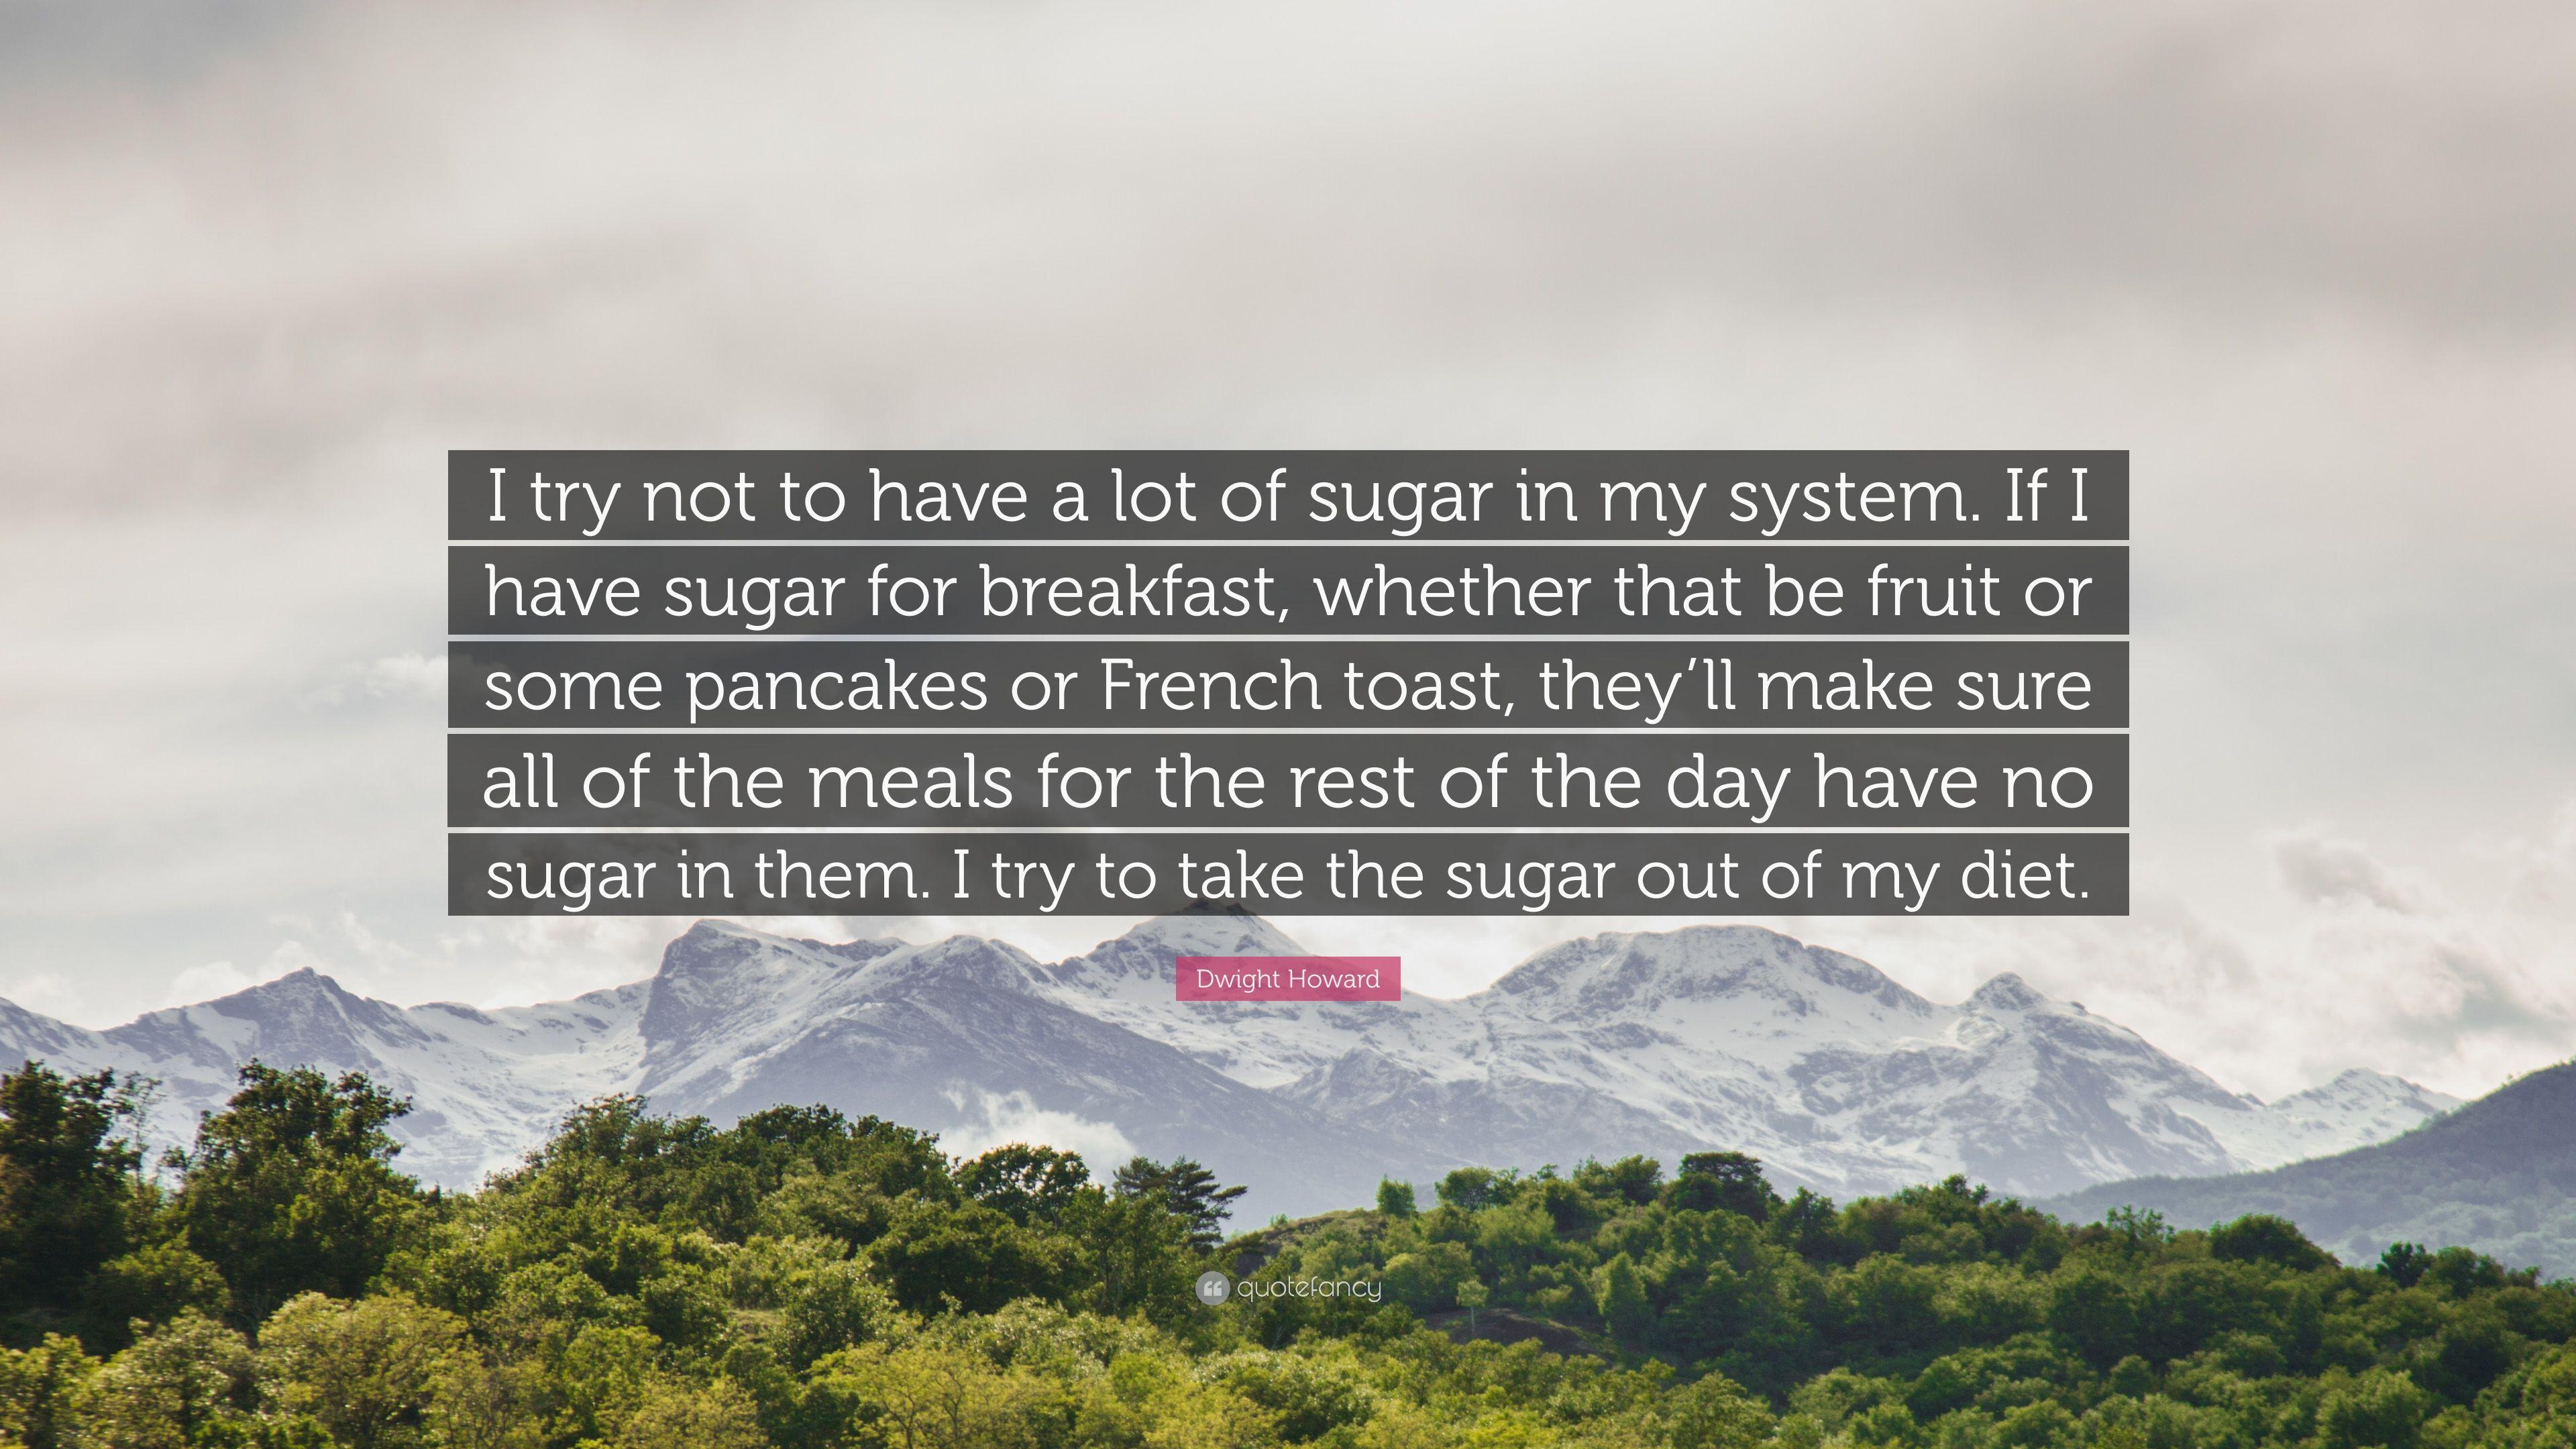 Dwight Howard Quote: “I try not to have a lot of sugar in my system